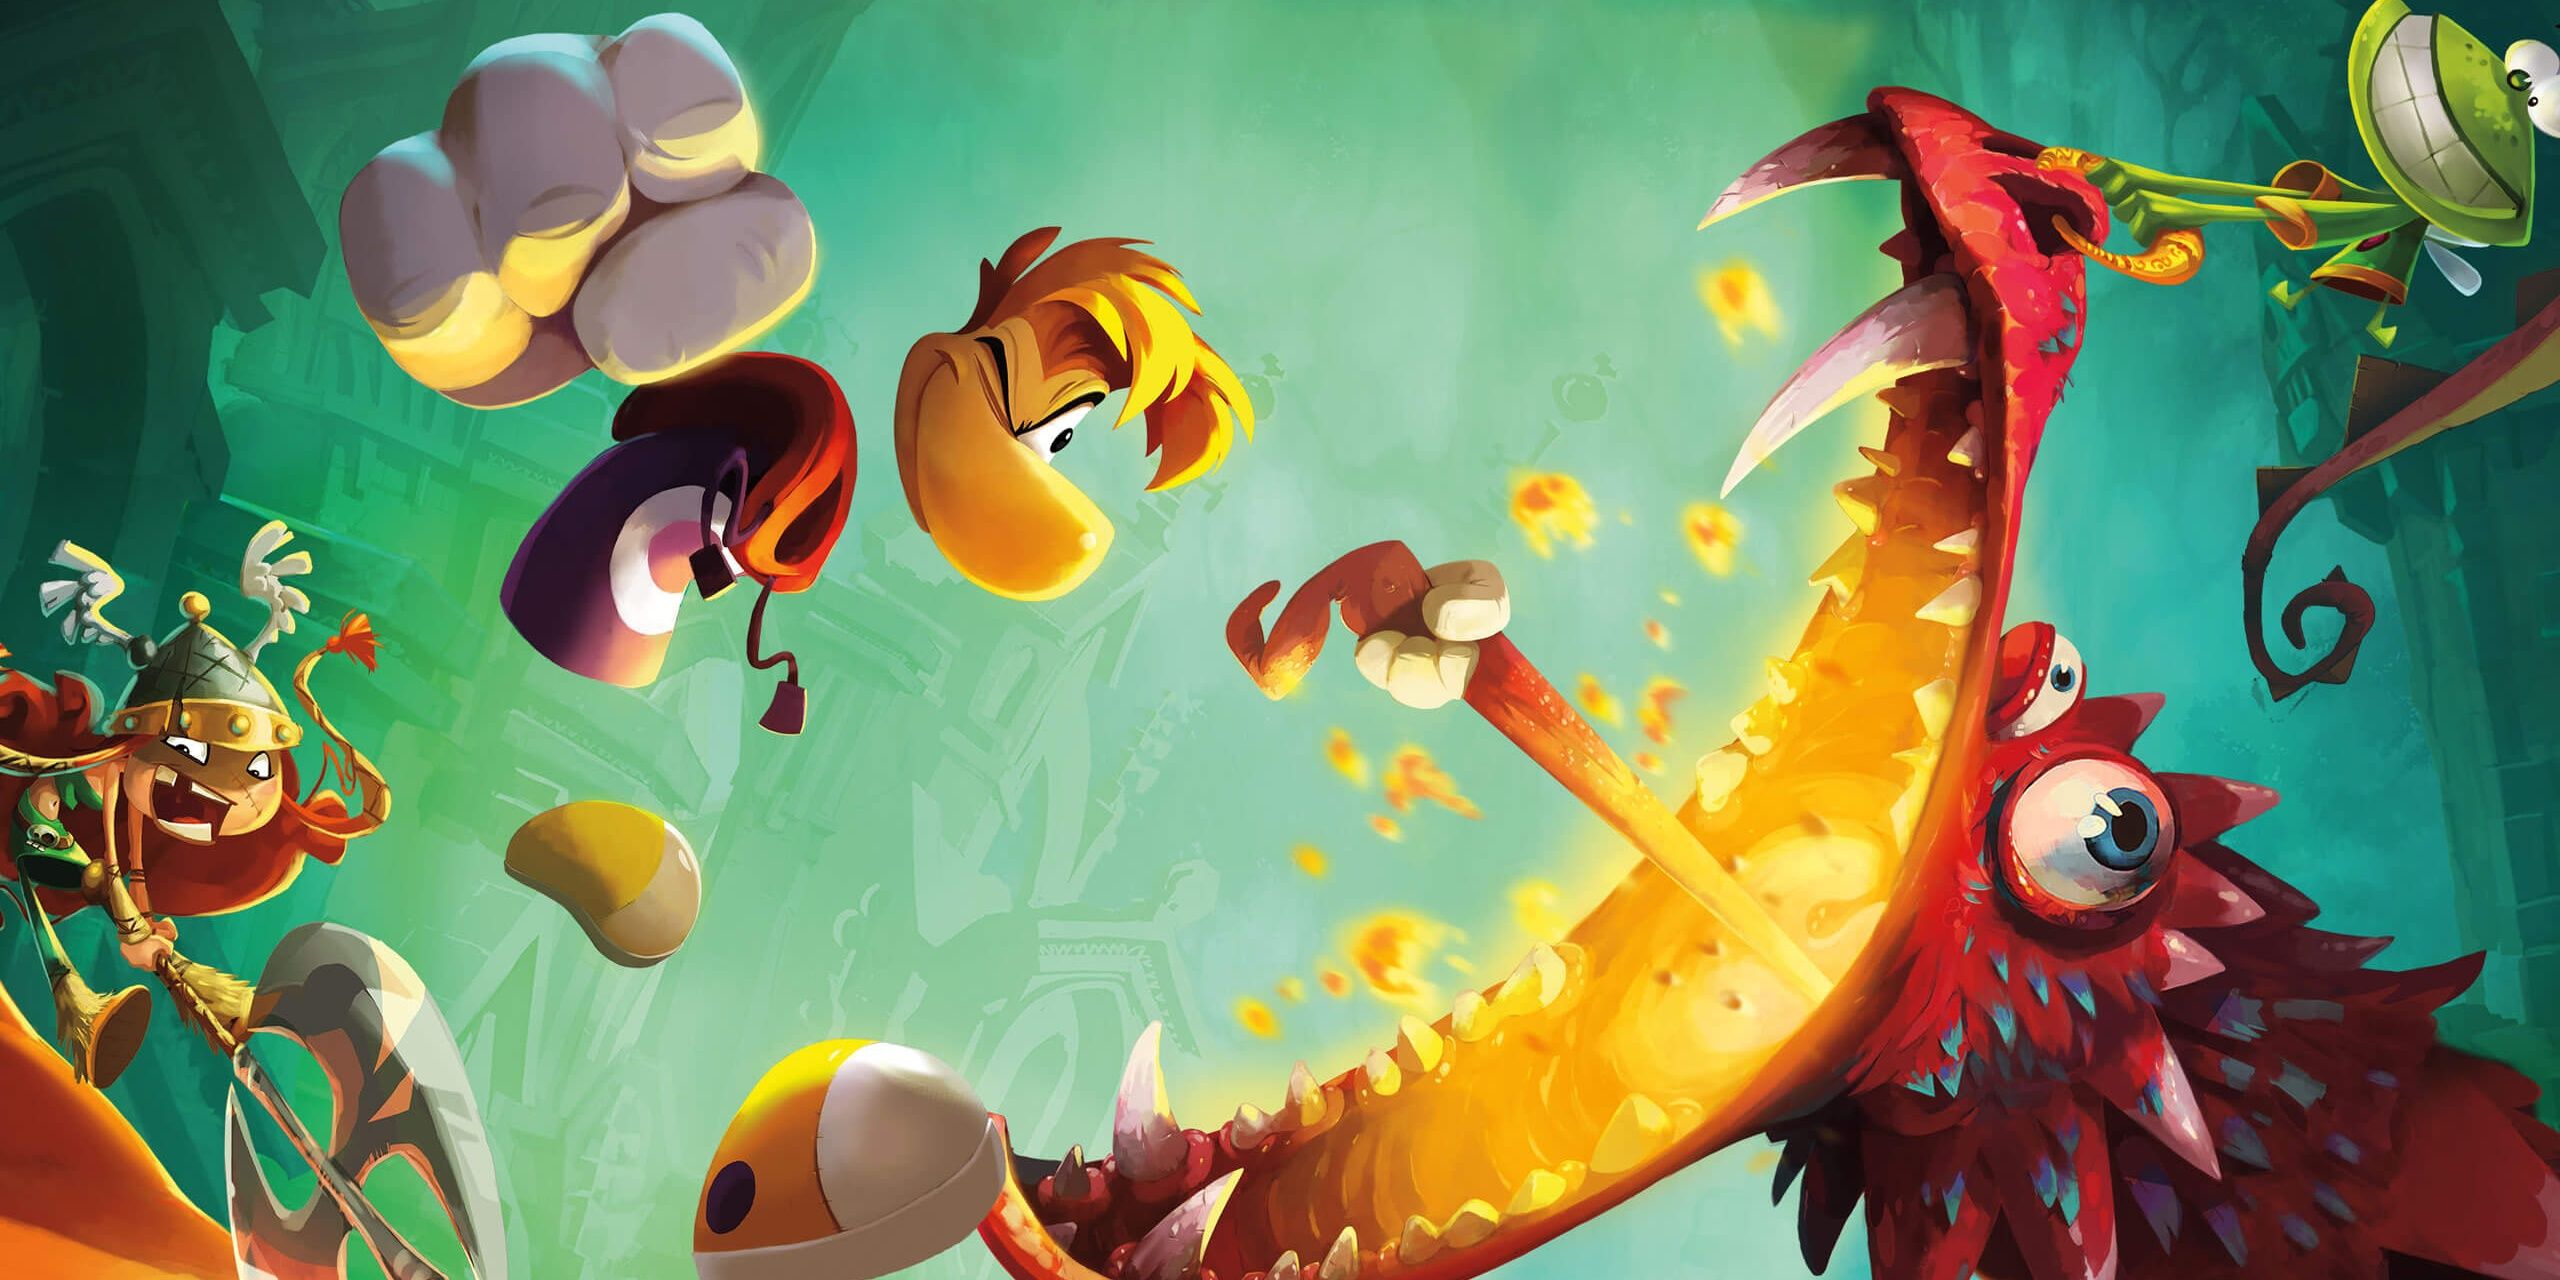 Rayman and friends beating up an enemy on the Rayman Legends cover art